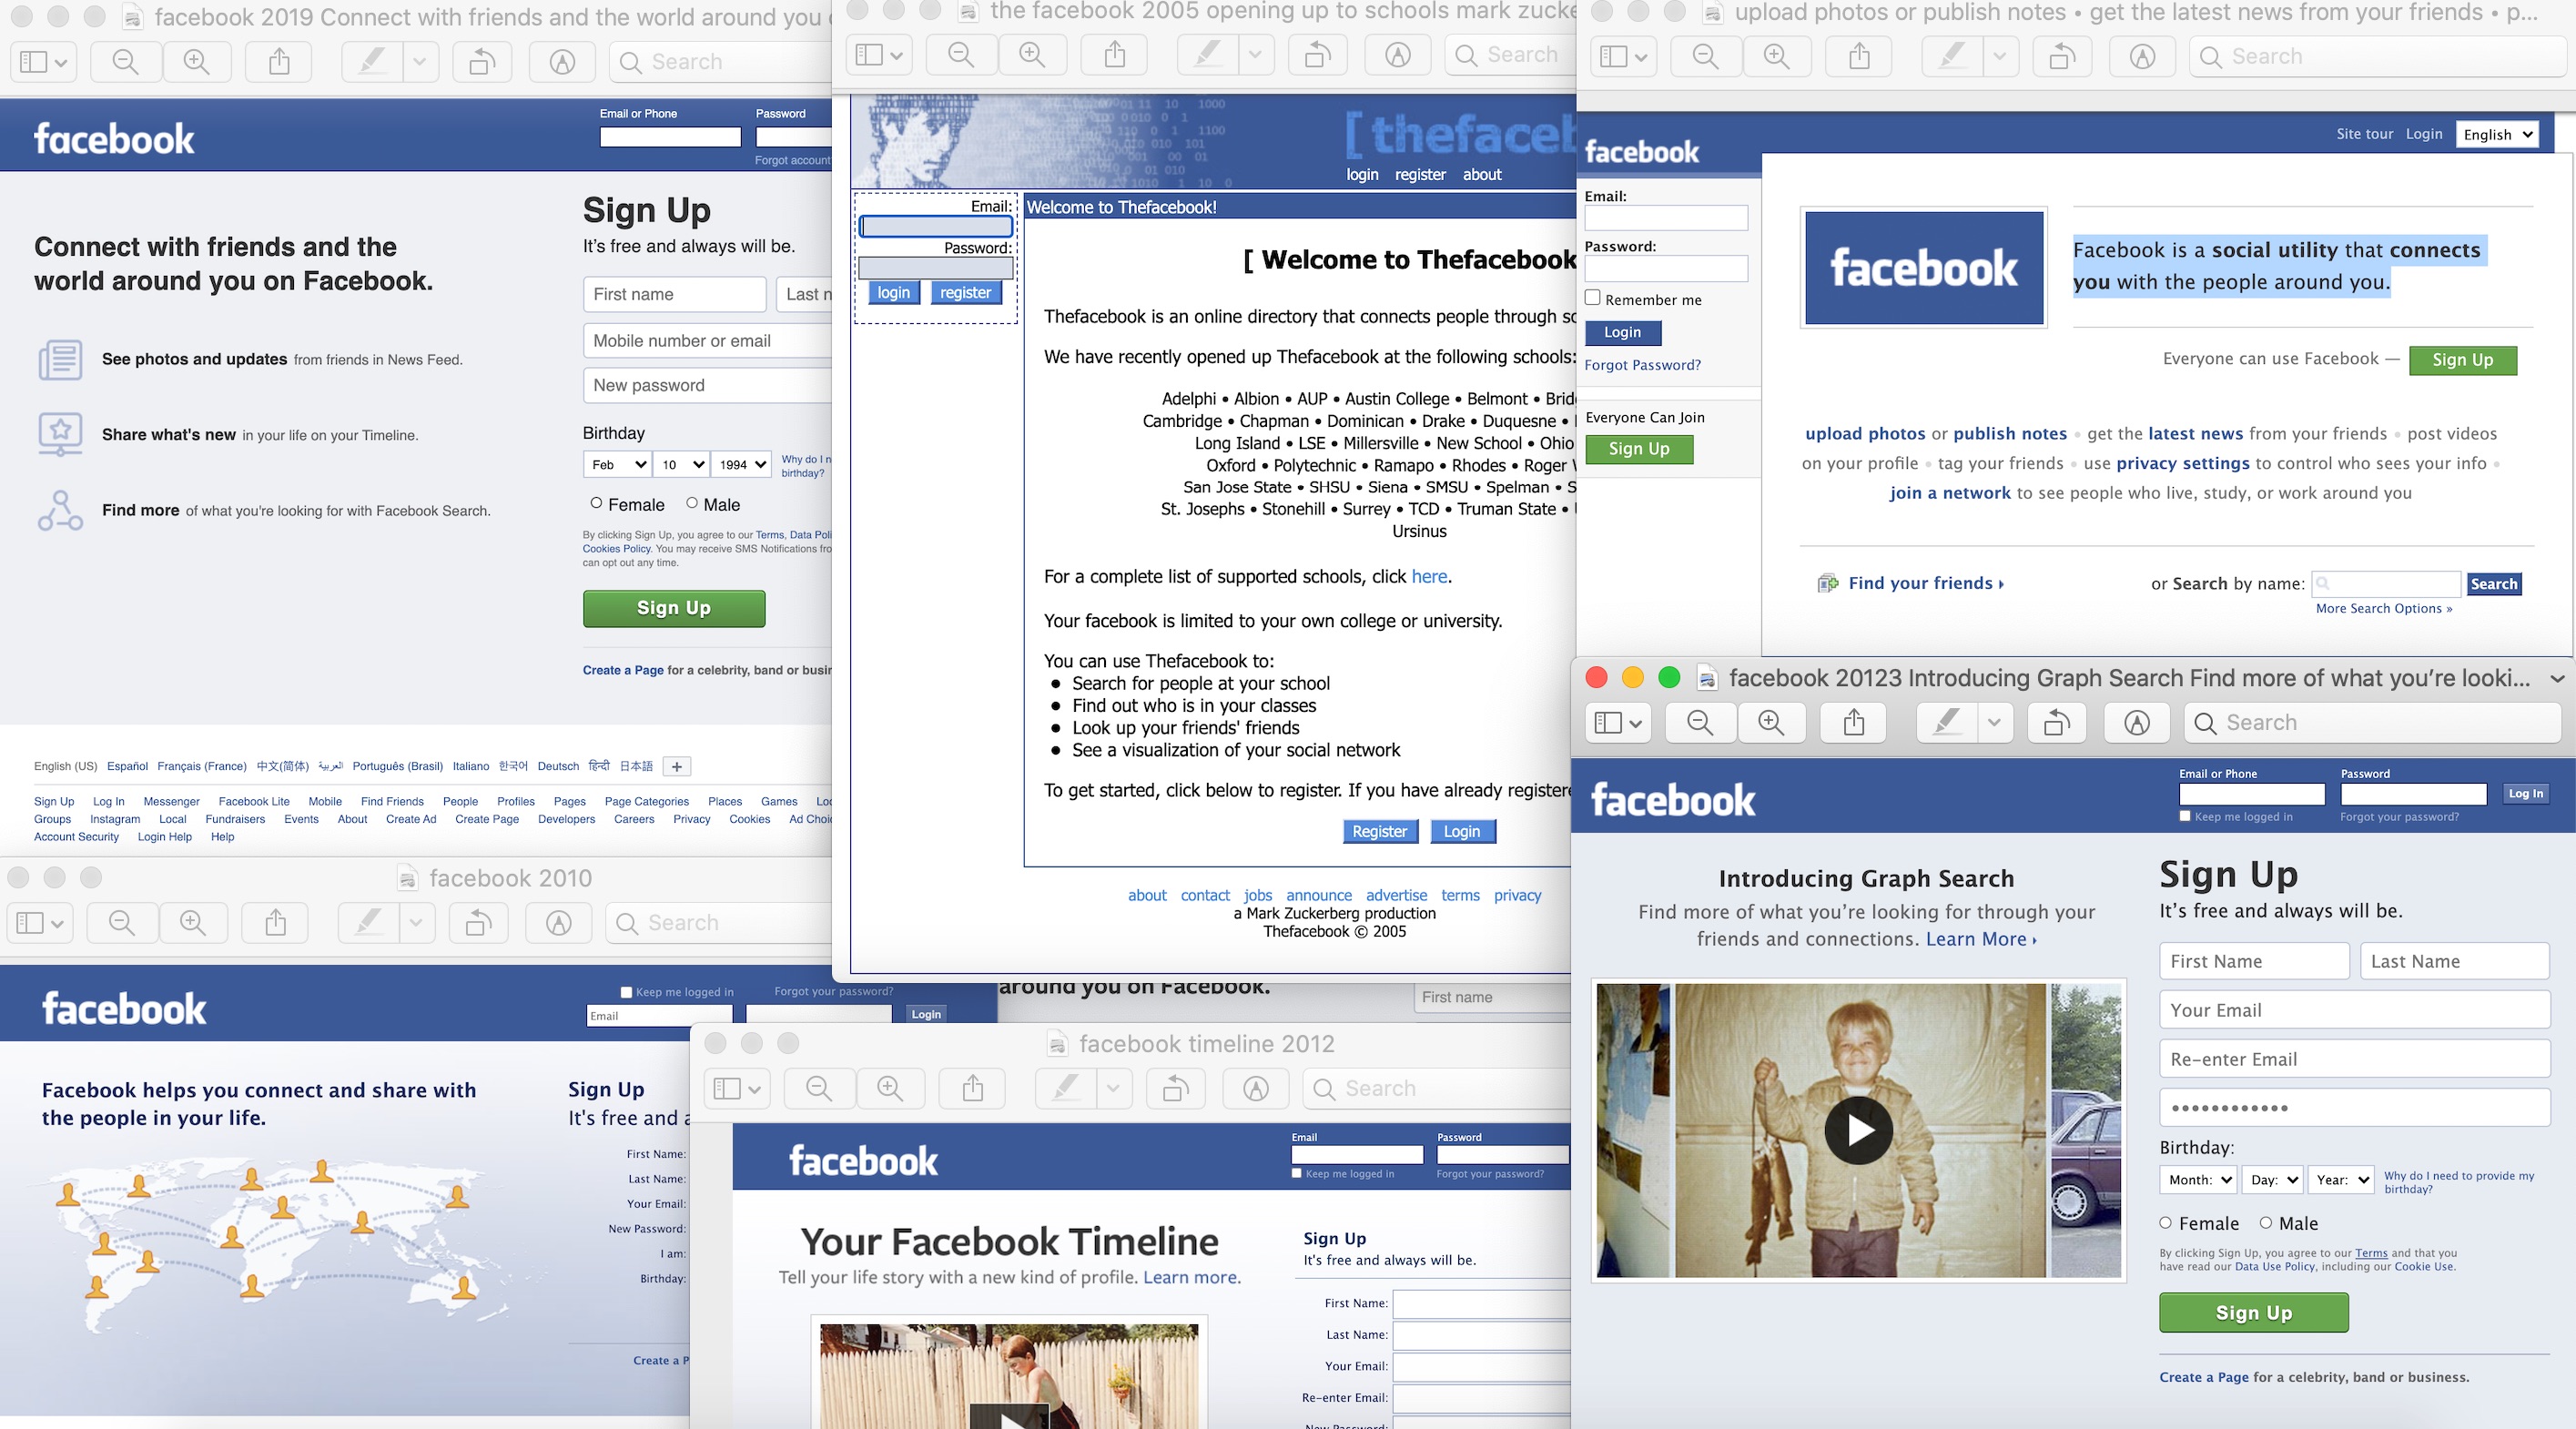 /how-facebook-changed-their-homepage-every-year-for-the-last-17-years-ek6w3ell feature image